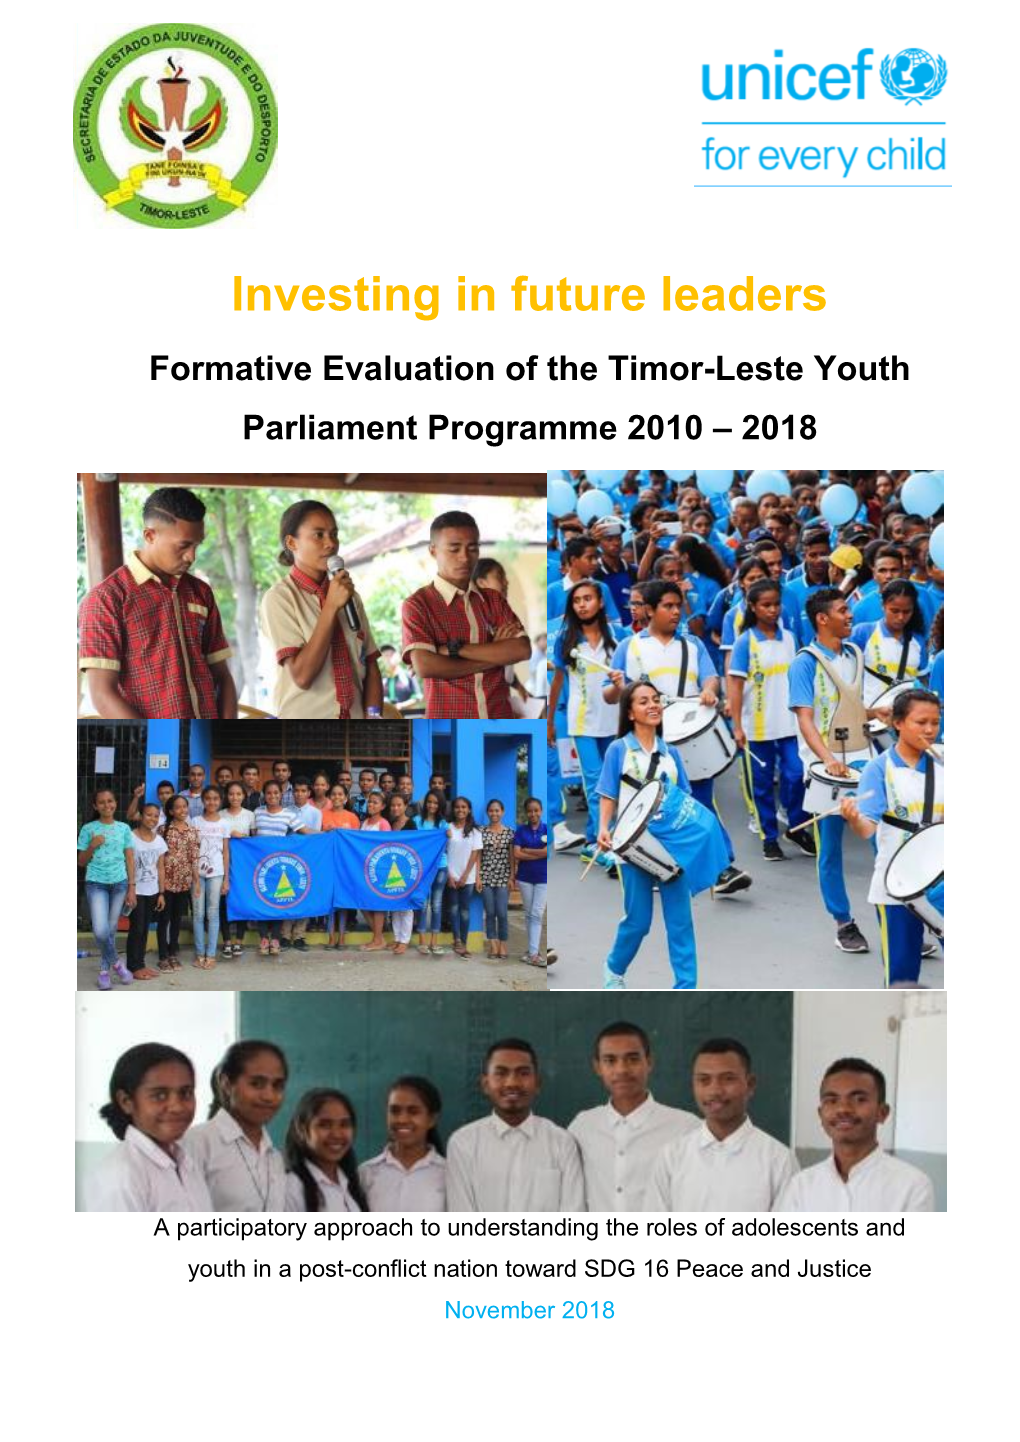 Formative Evaluation of the Timor-Leste Youth Parliament Programme 2010 – 2018